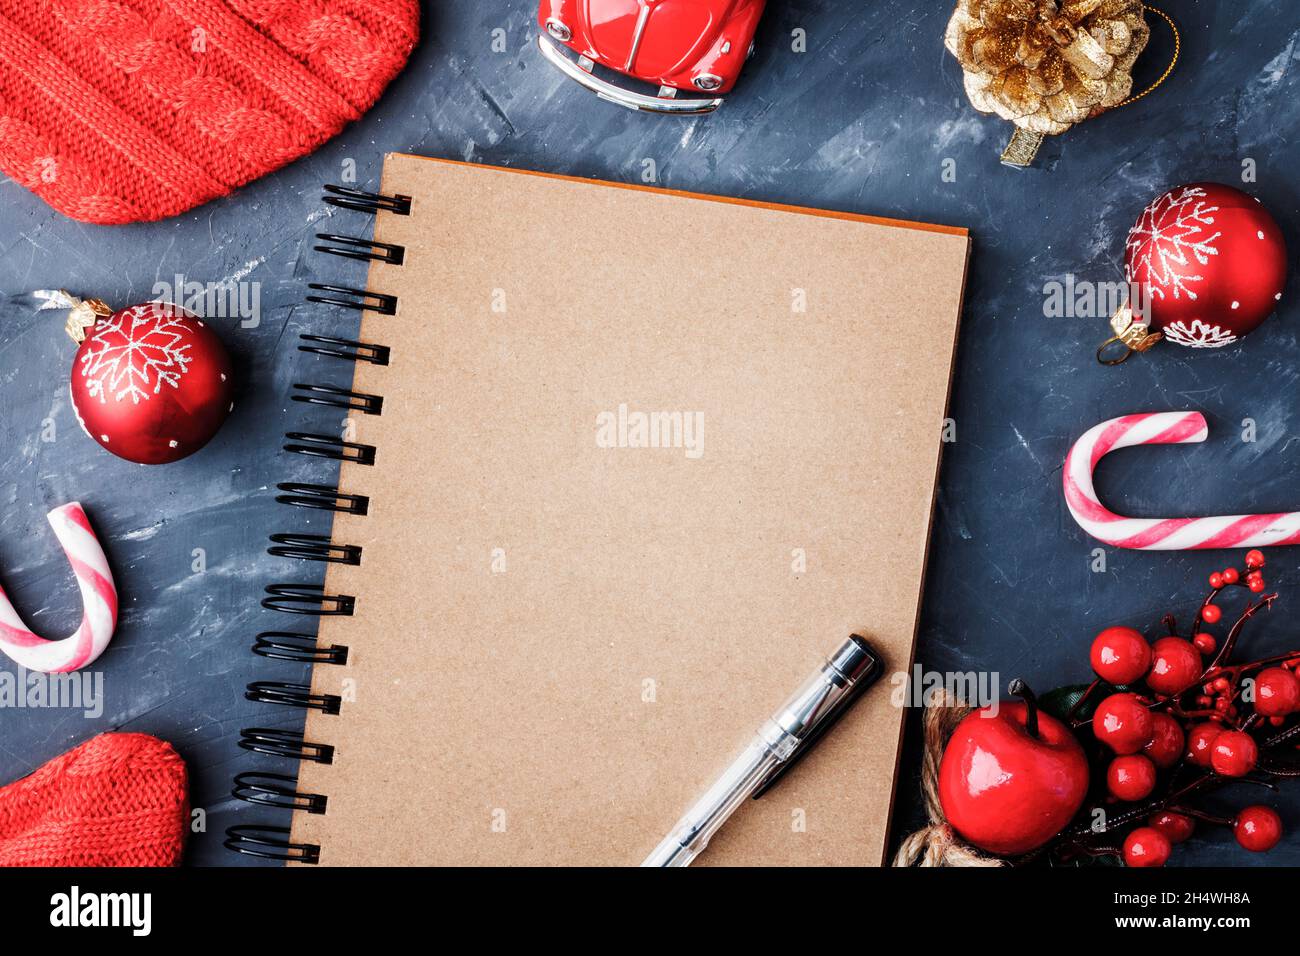 Notebook for records. A blank notebook page on a blue background next to Christmas branches and a Christmas ball. Christmas, New Year's concept. Top v Stock Photo